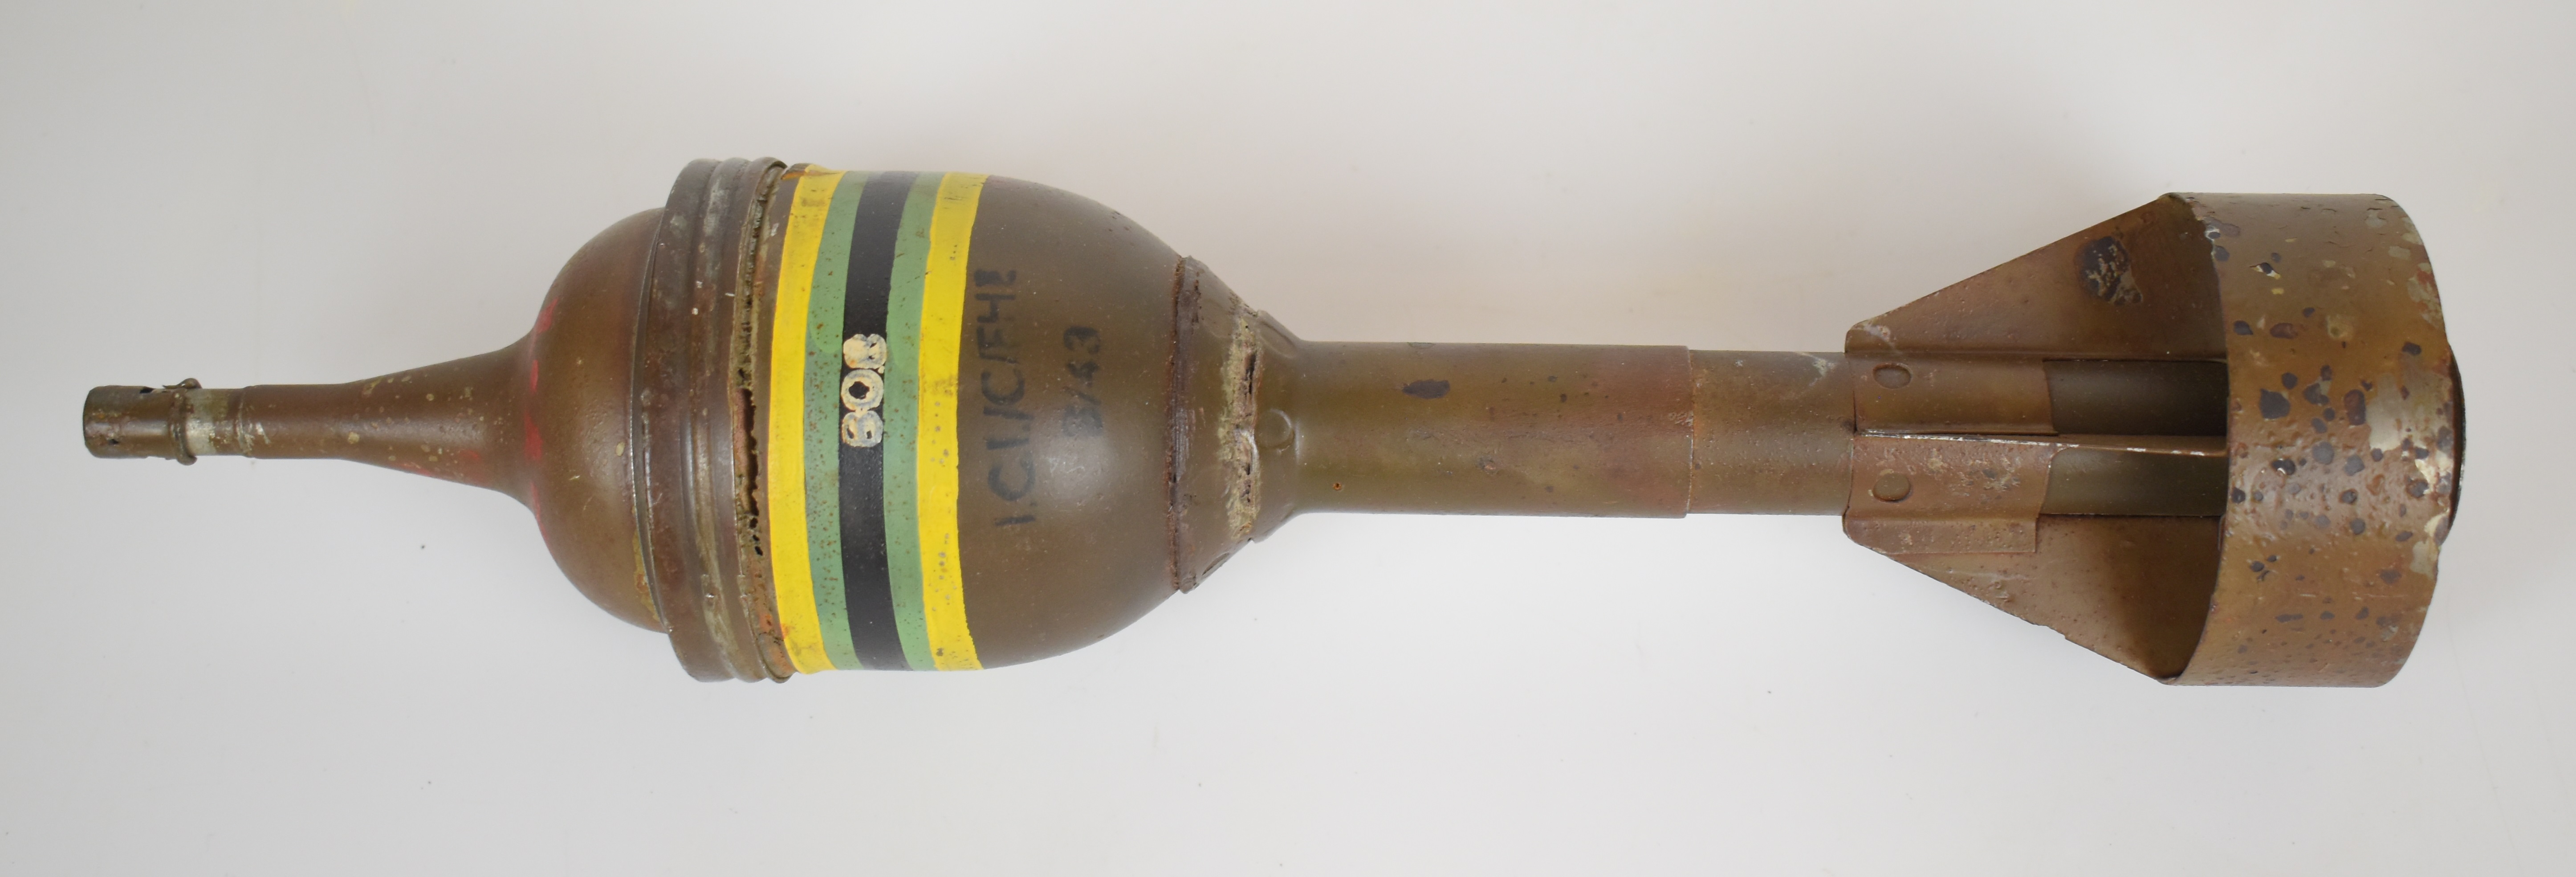 British WW2 PIAT (Projectile Infantry Anti Tank) inert round, ink stamped 3/43 / LOT 78 - Image 3 of 4